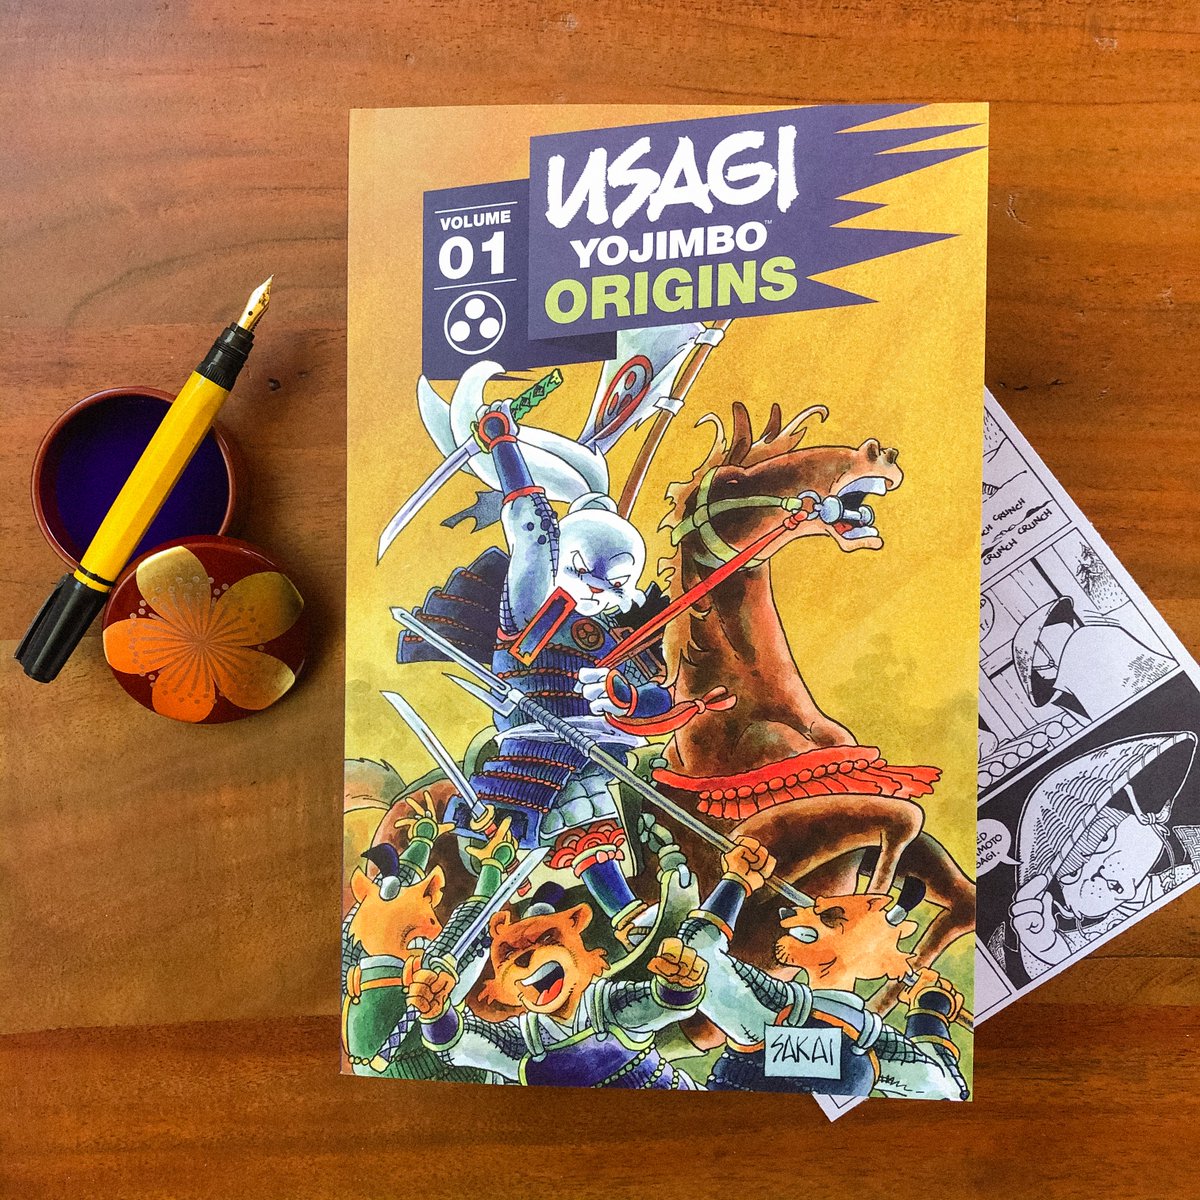 Usagi Yojimbo Origins Vol. 1 is now sale on stansakai.com. 🐰 ⚔️ Each purchase comes with a FREE signature and remarqued options are available for purchase. 📚 ✍️ #UsagiYojimbo #WCA2021 #WonderCon